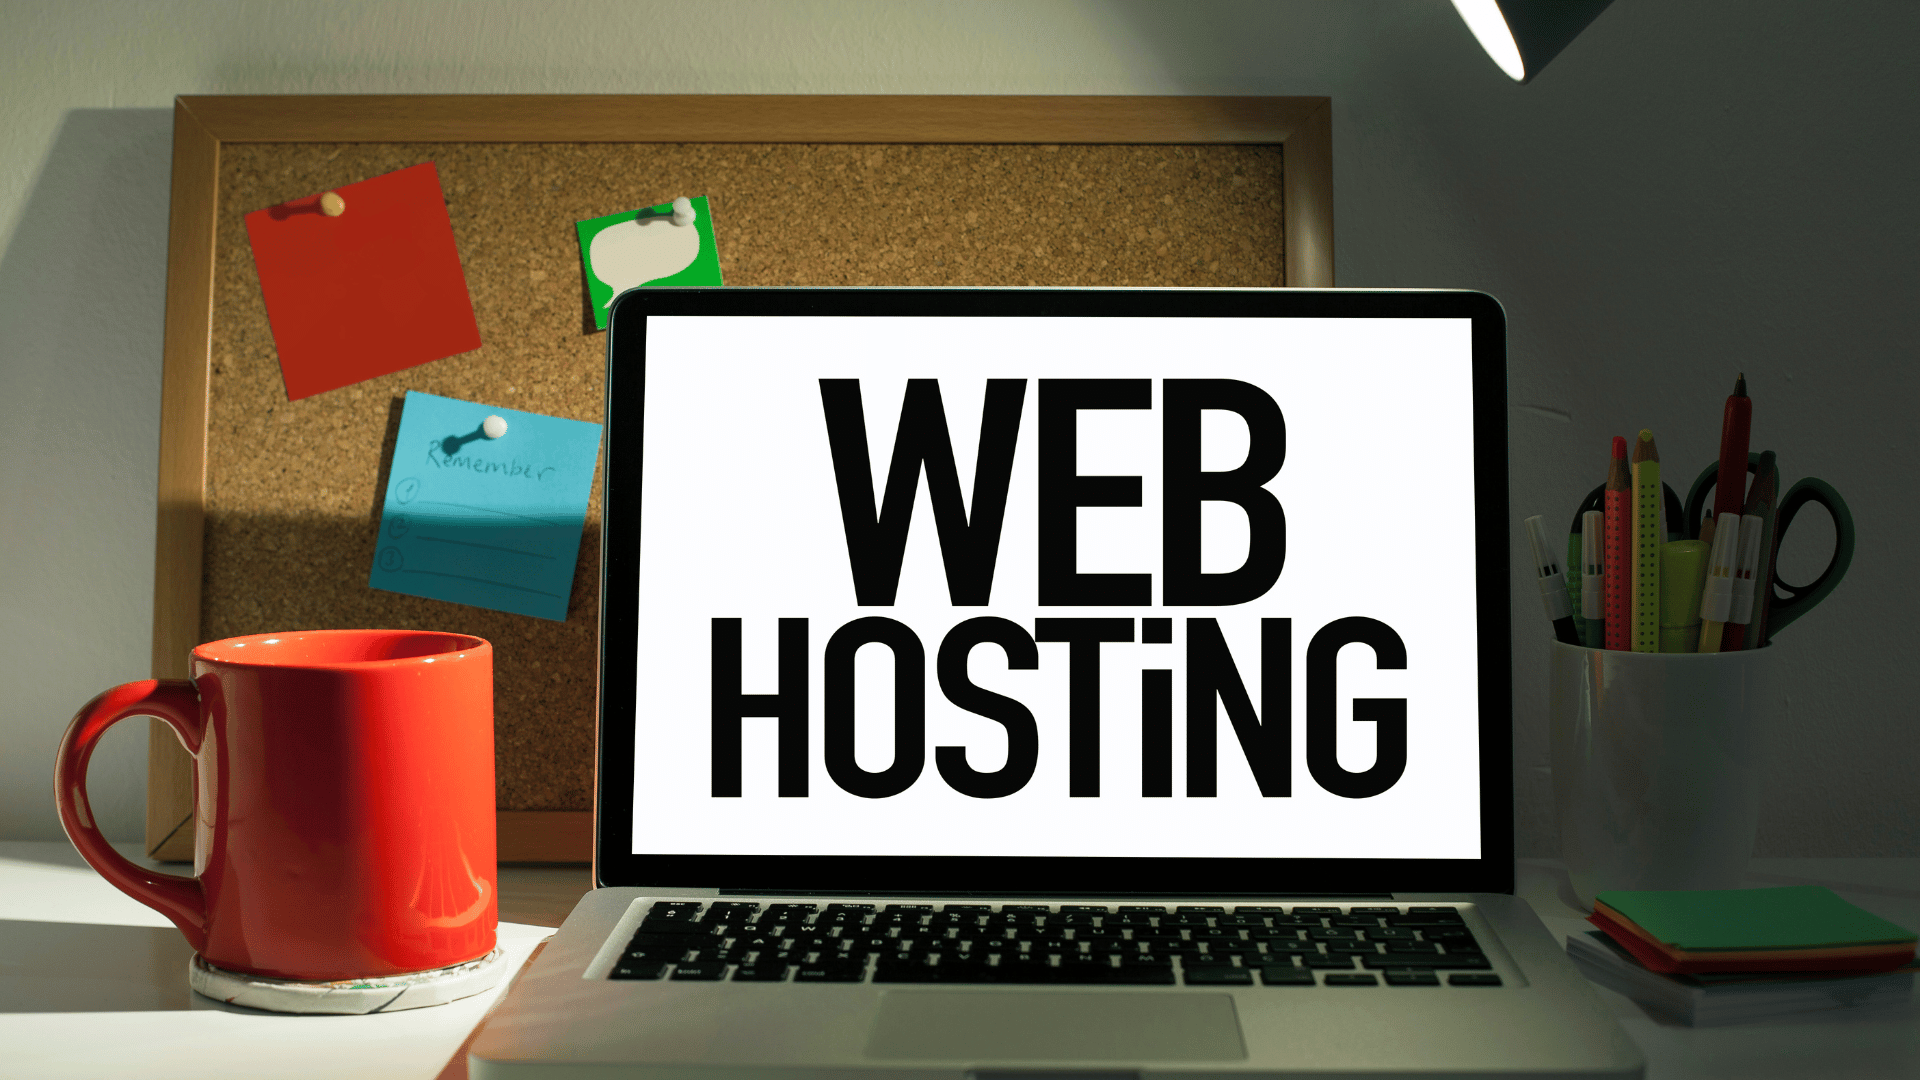 Bluehost Review: How Does It Compare to Other Web Hosting Providers?